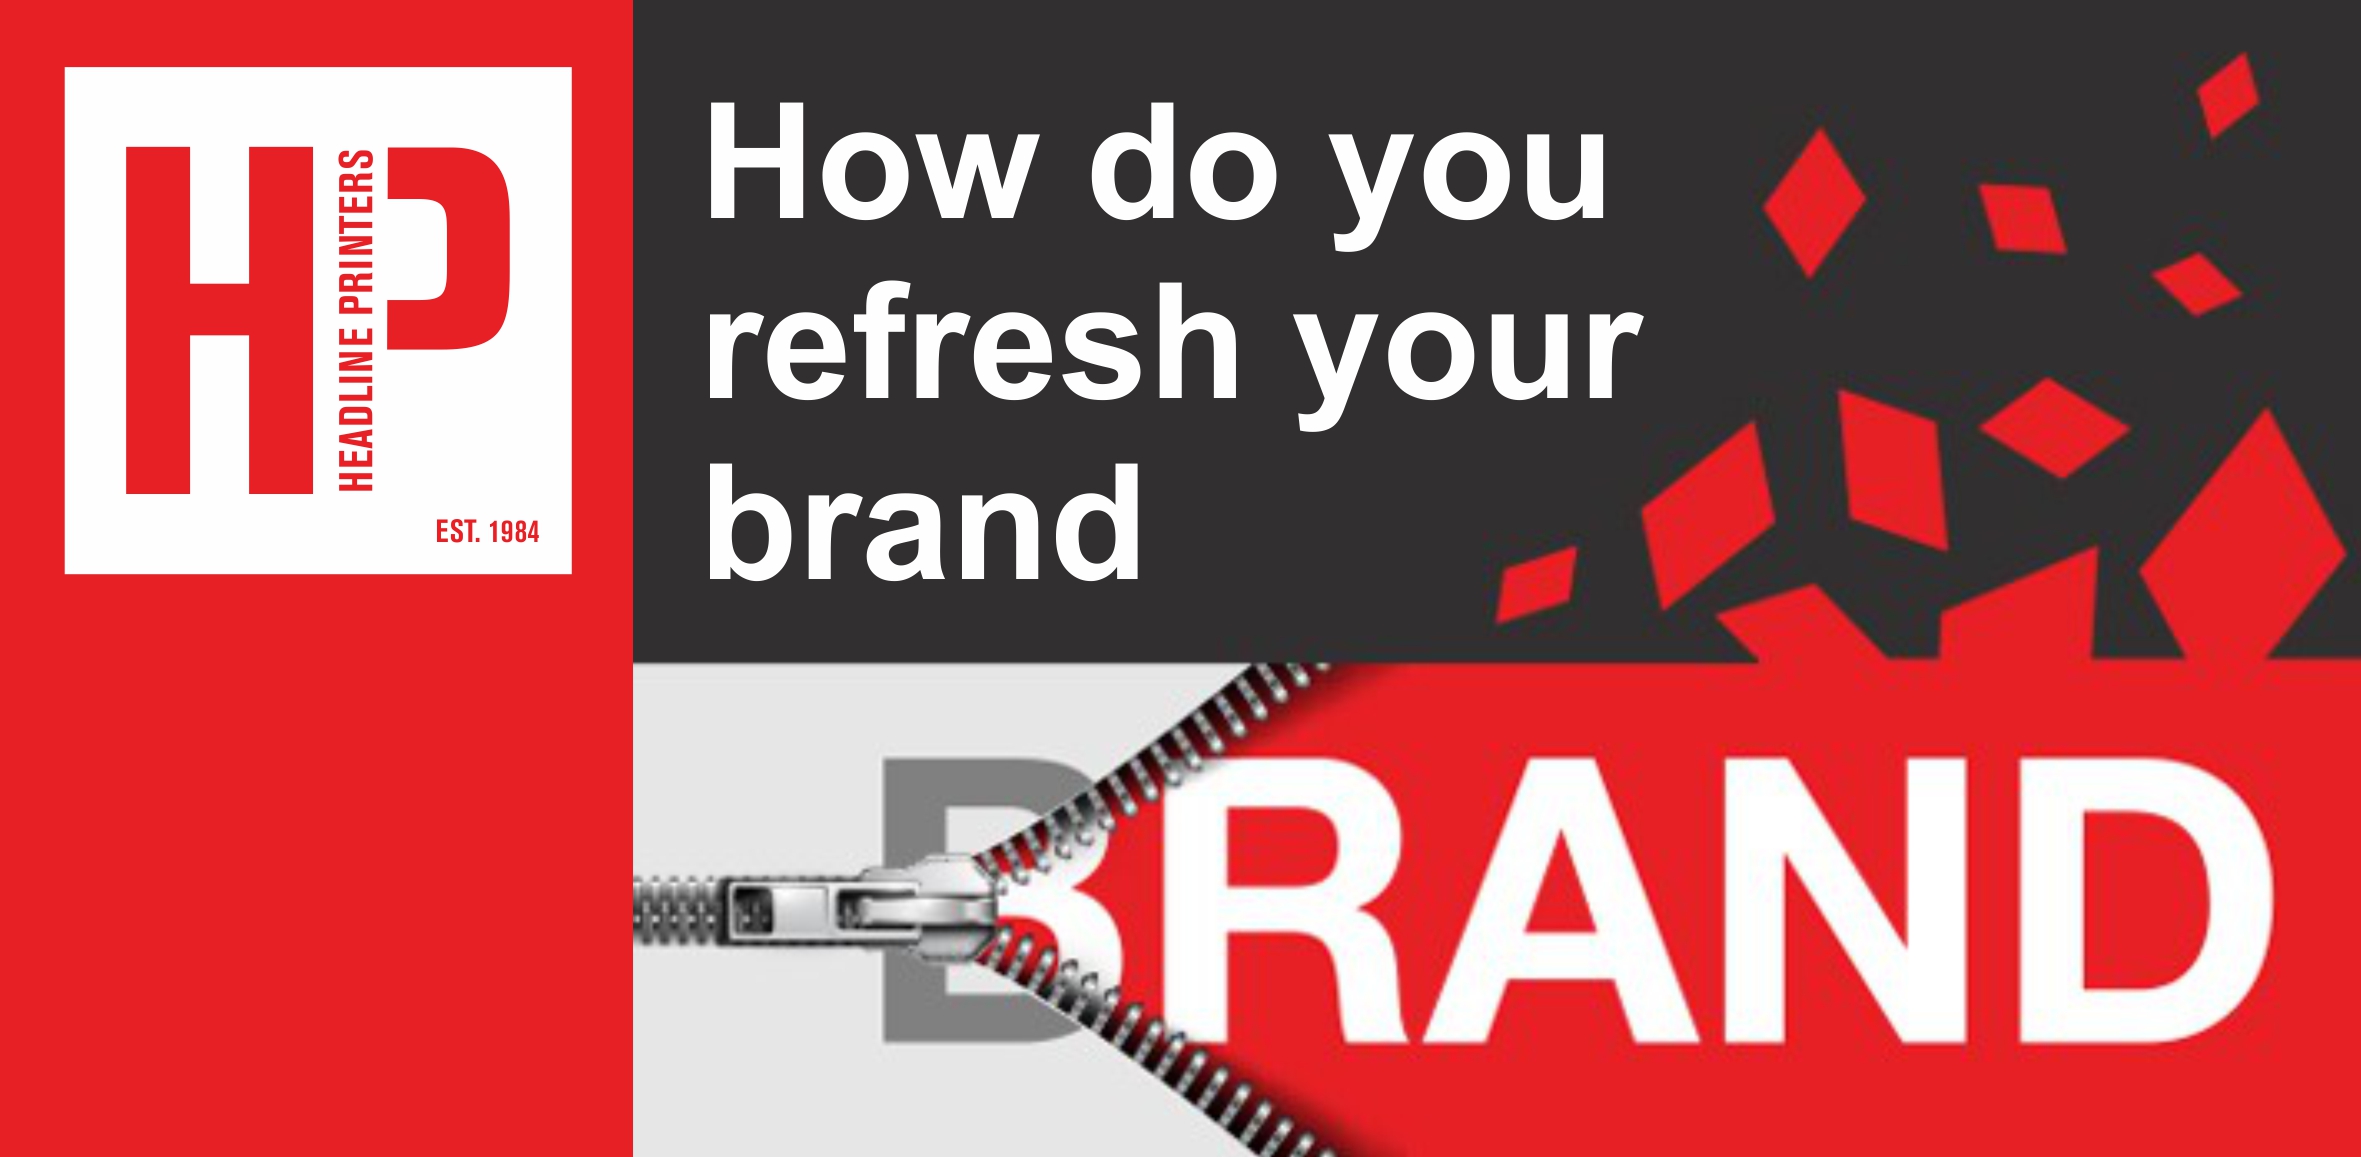 How do you refresh your brand